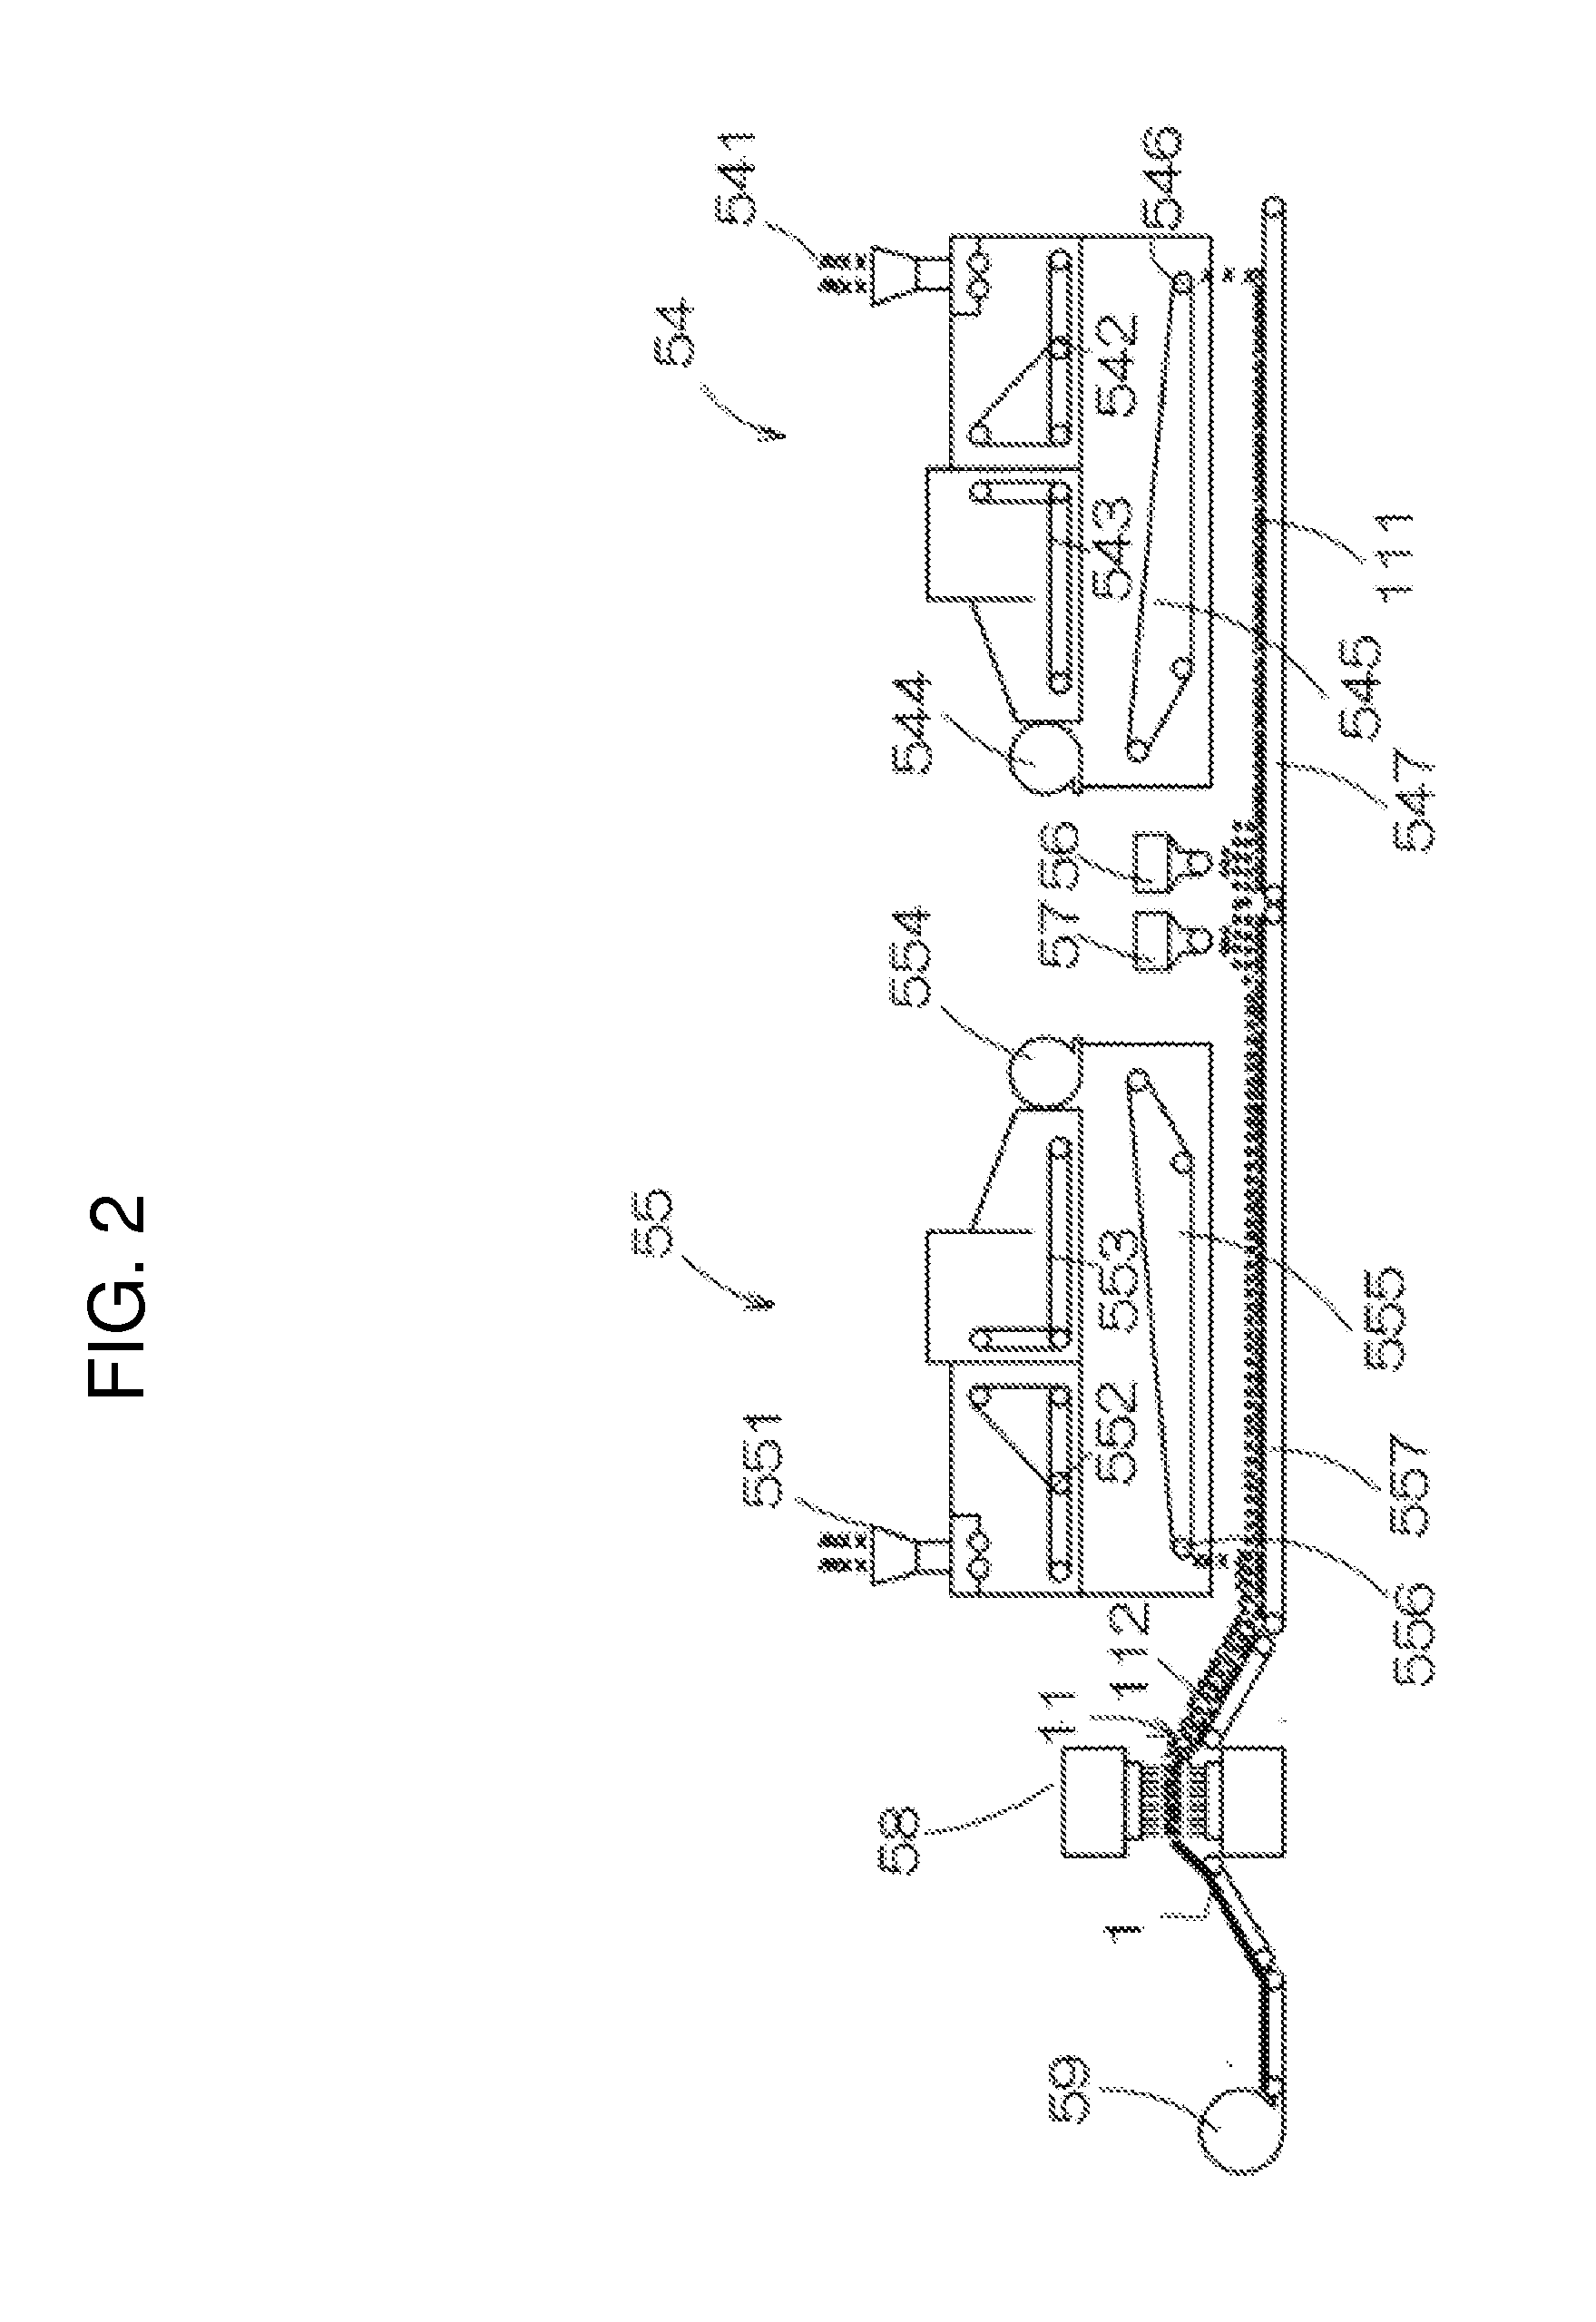 Method for manufacturing thermally expandable base material for vehicle interior and method for manufacturing base material for vehicle interior using same